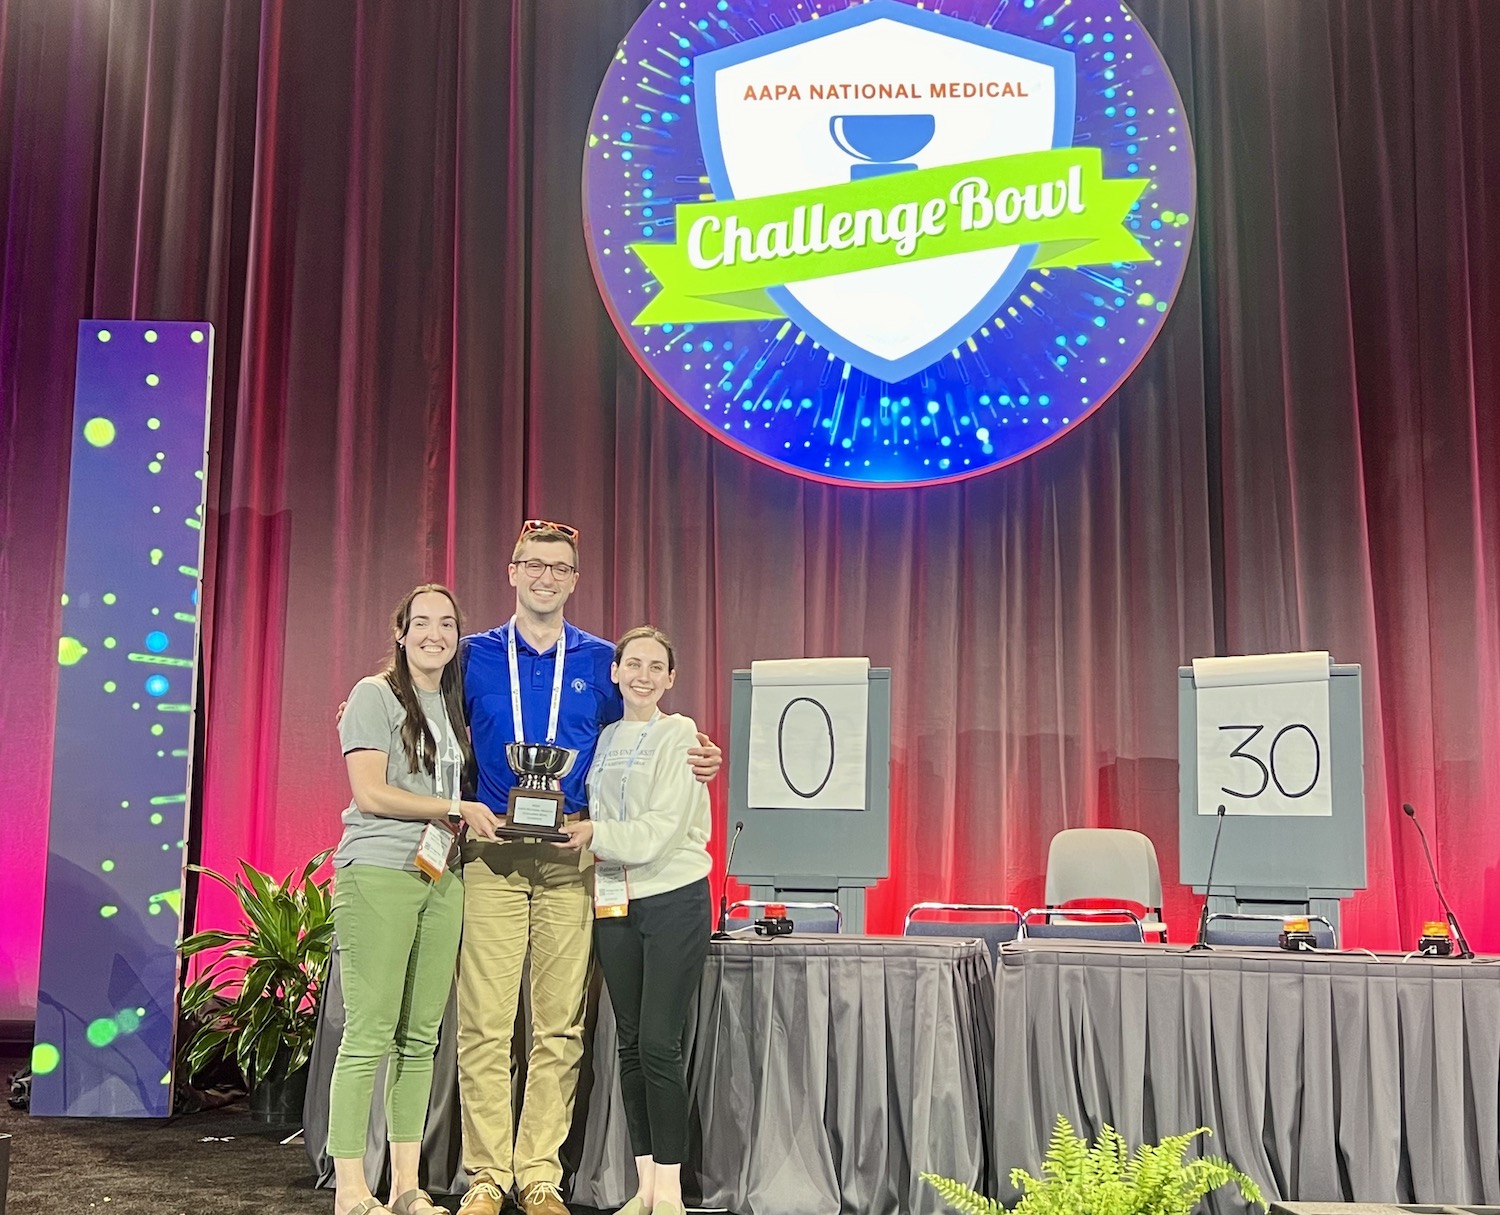 SLU PA students Rebecca Oberkrom, Katie Reddy, and David Shengelia at the 2024 AAPA National Medical Challenge Bowl competition. 